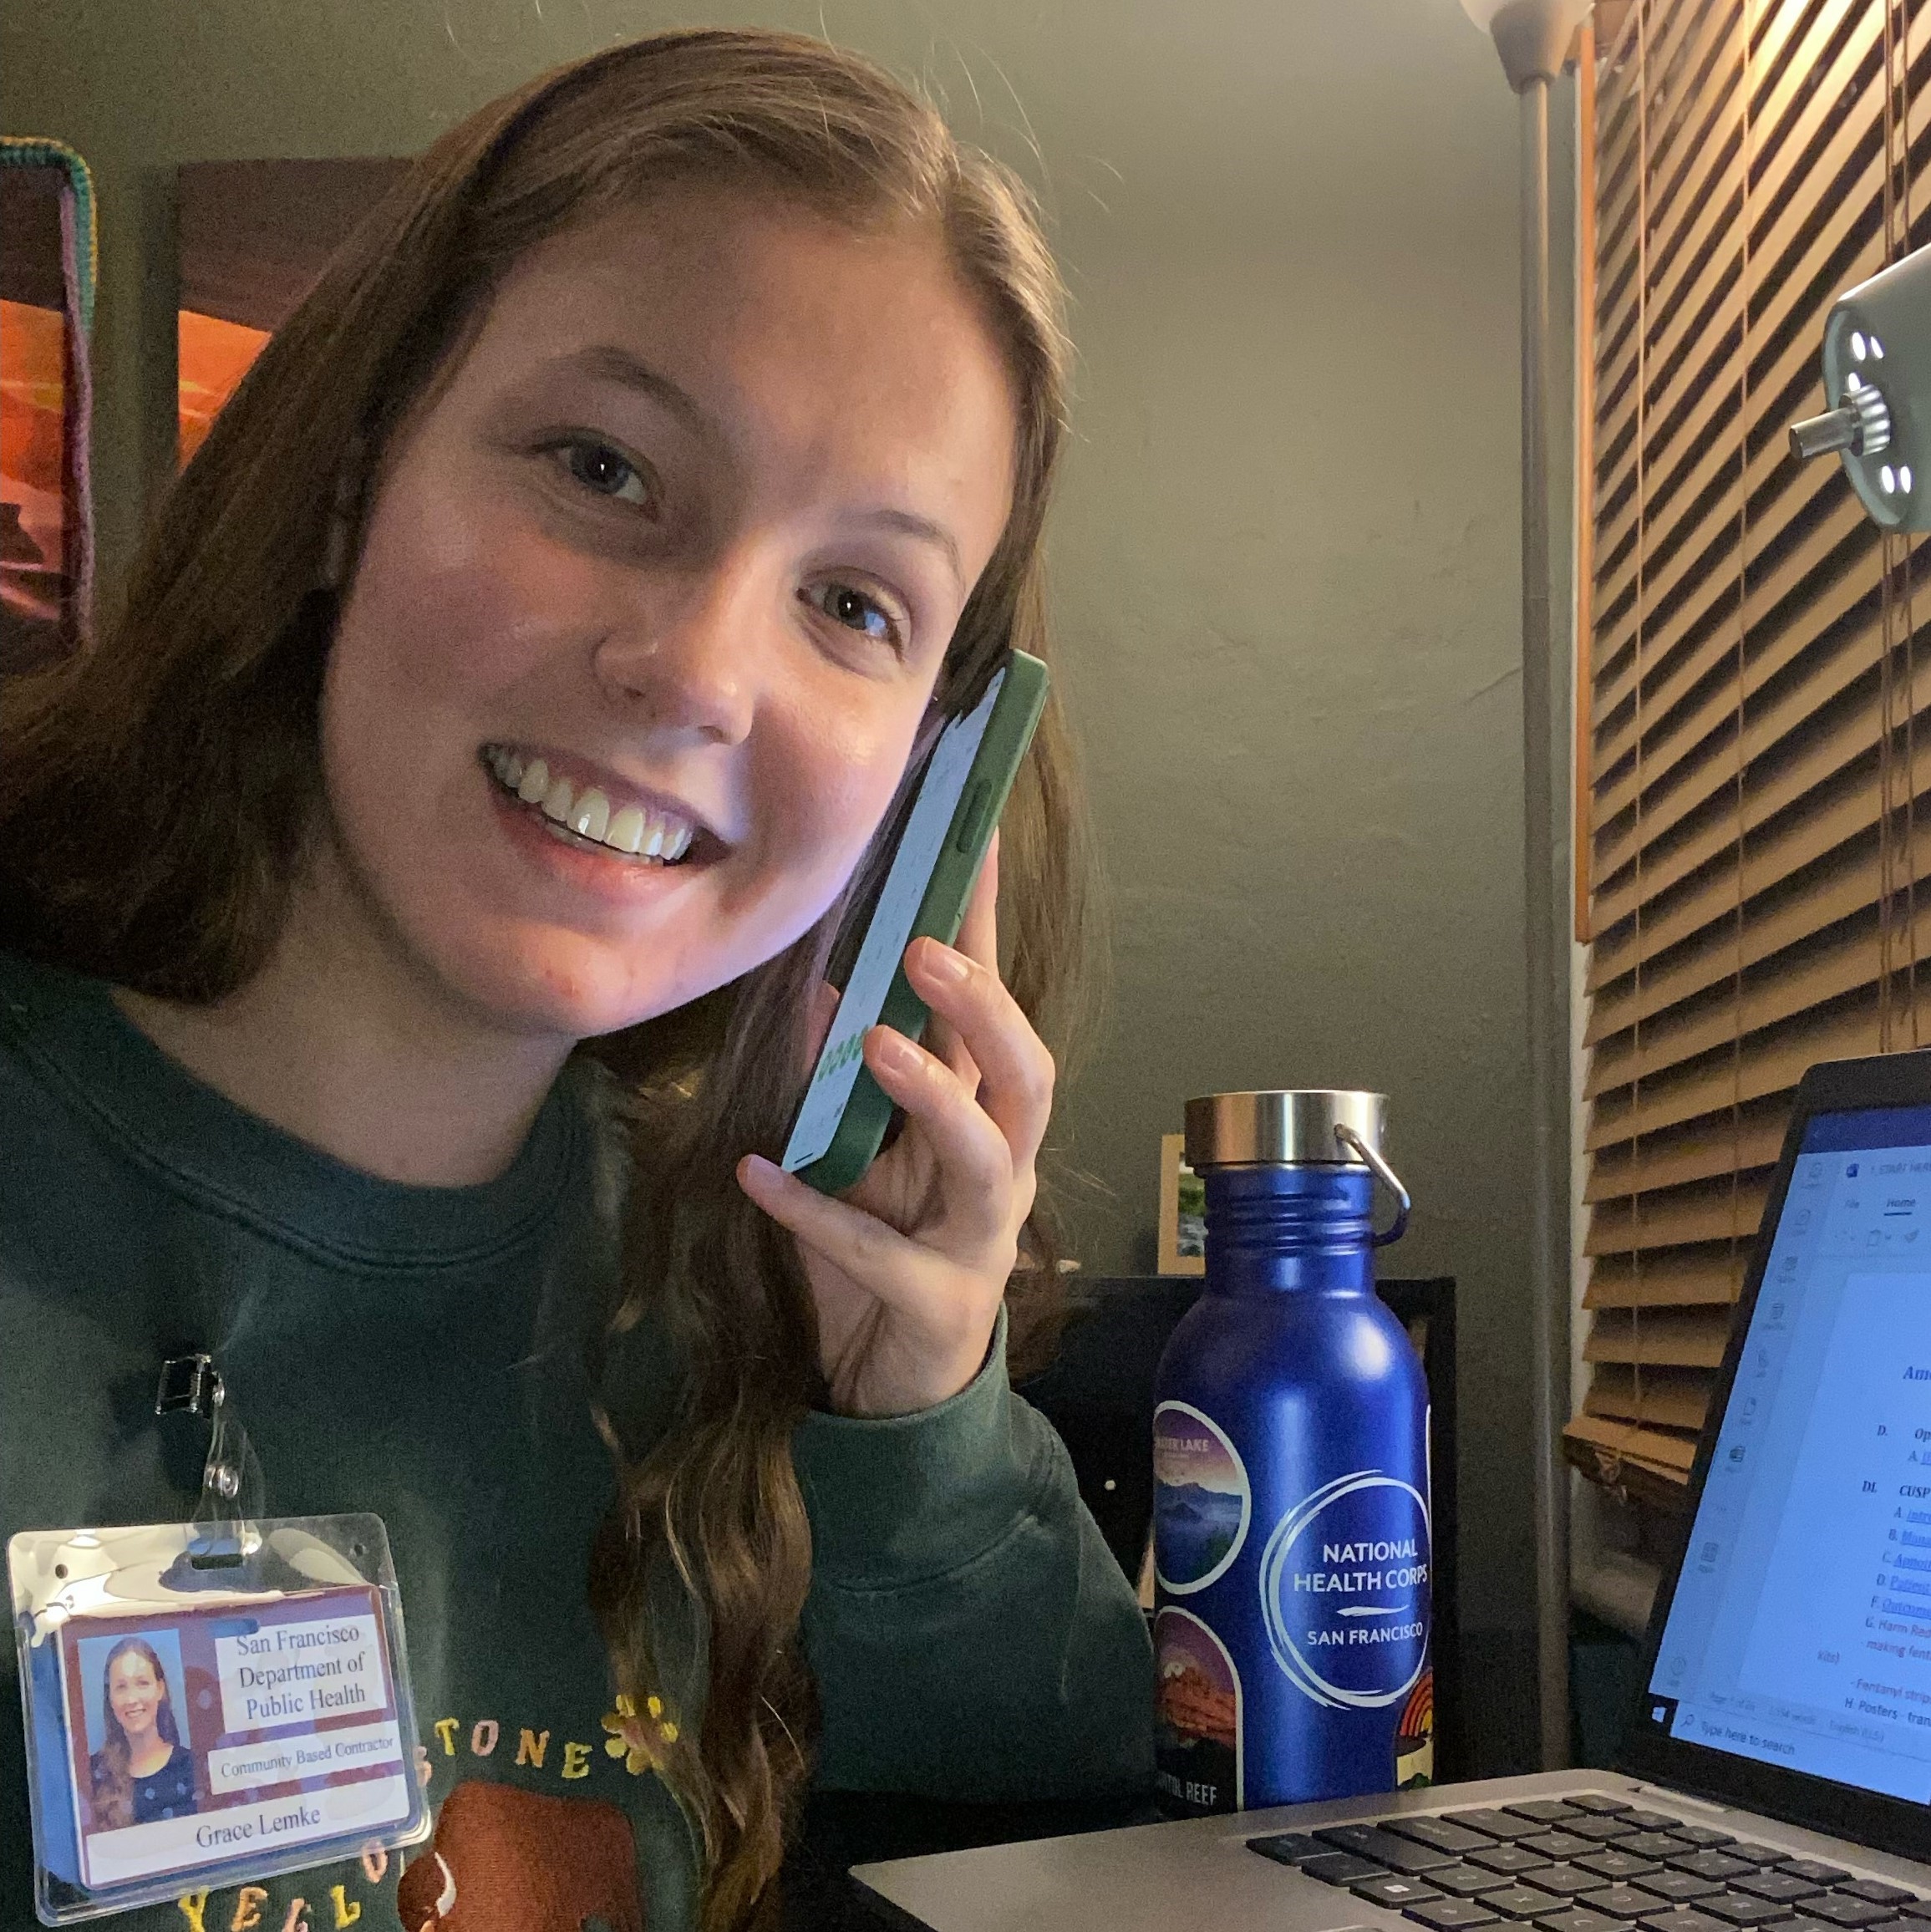 Grace is seen on the phone, while on her computer. In the background is a National Health Corps San Francisco water bottle. 